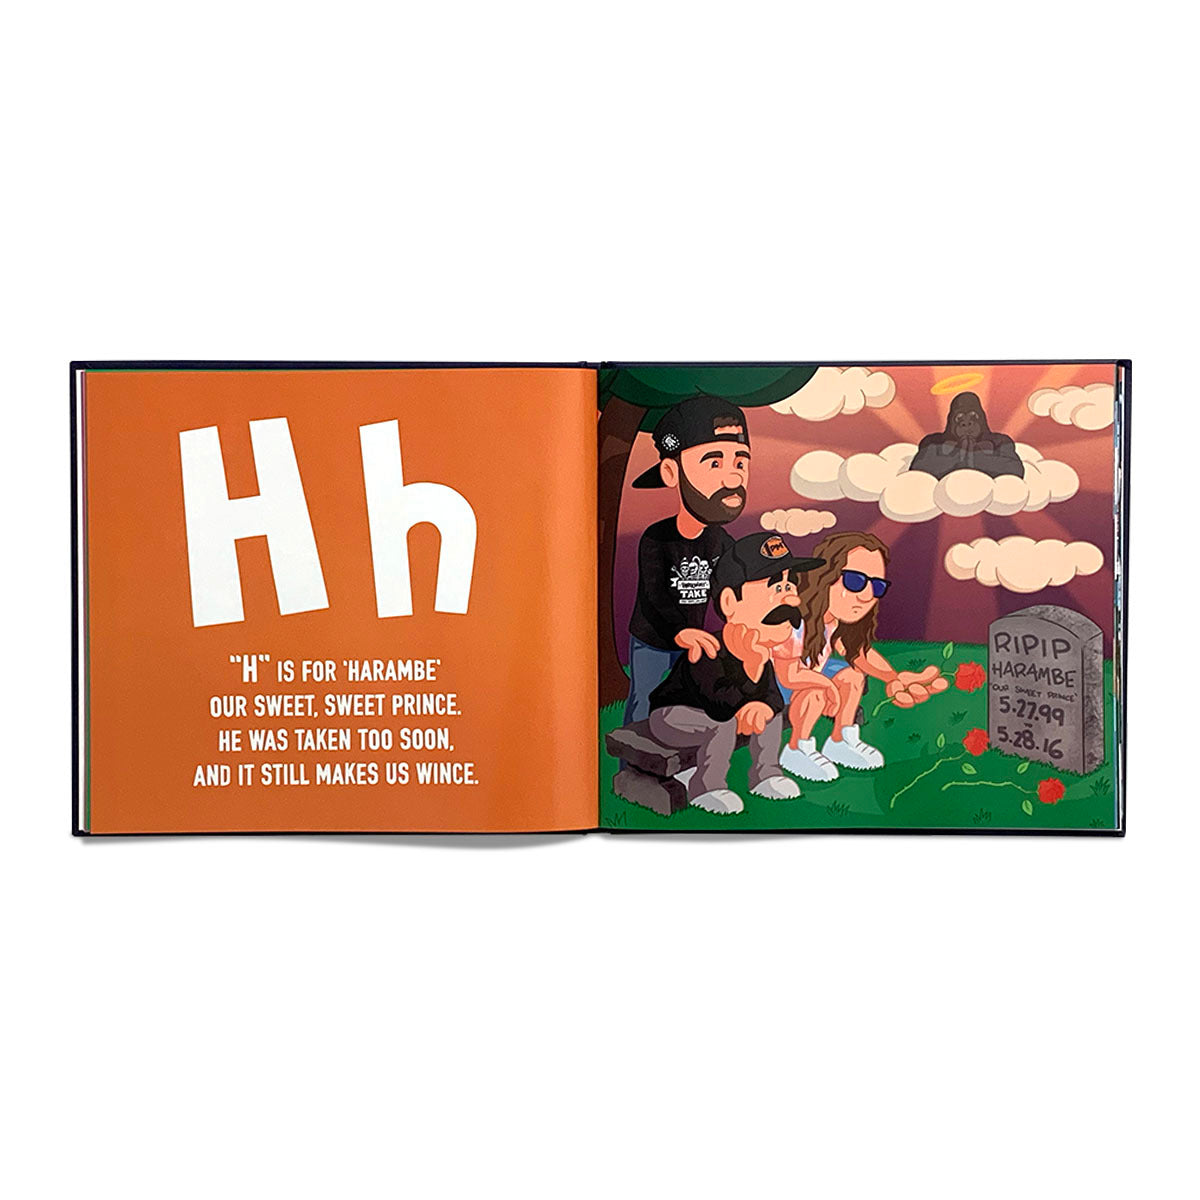 The ABC's of Barstool Sports Children's Book-Accessories-Barstool Sports-Navy-One Size-Barstool Sports